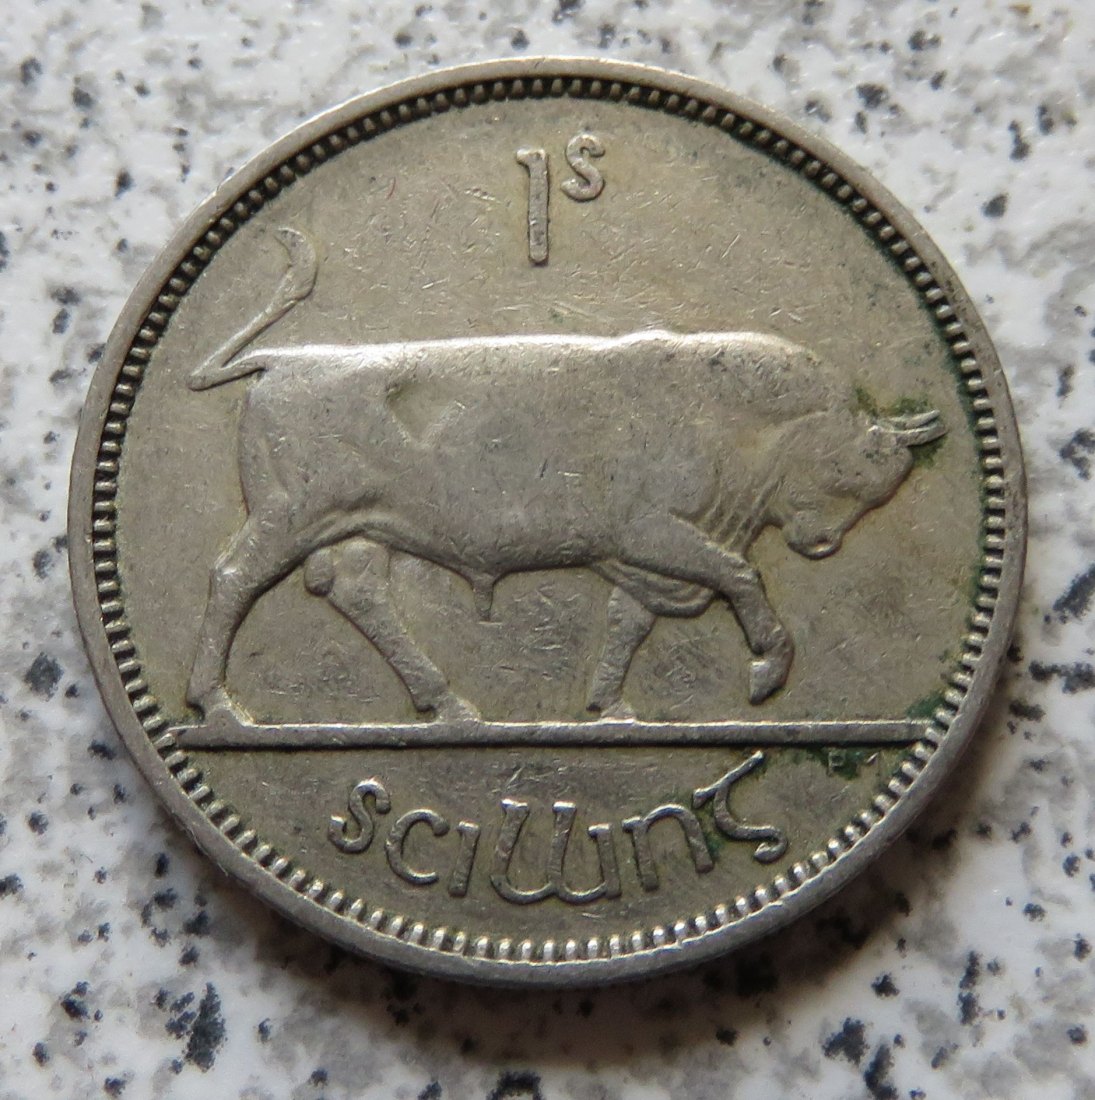  Irland One Shilling 1951 / 1 Scilling 1951   